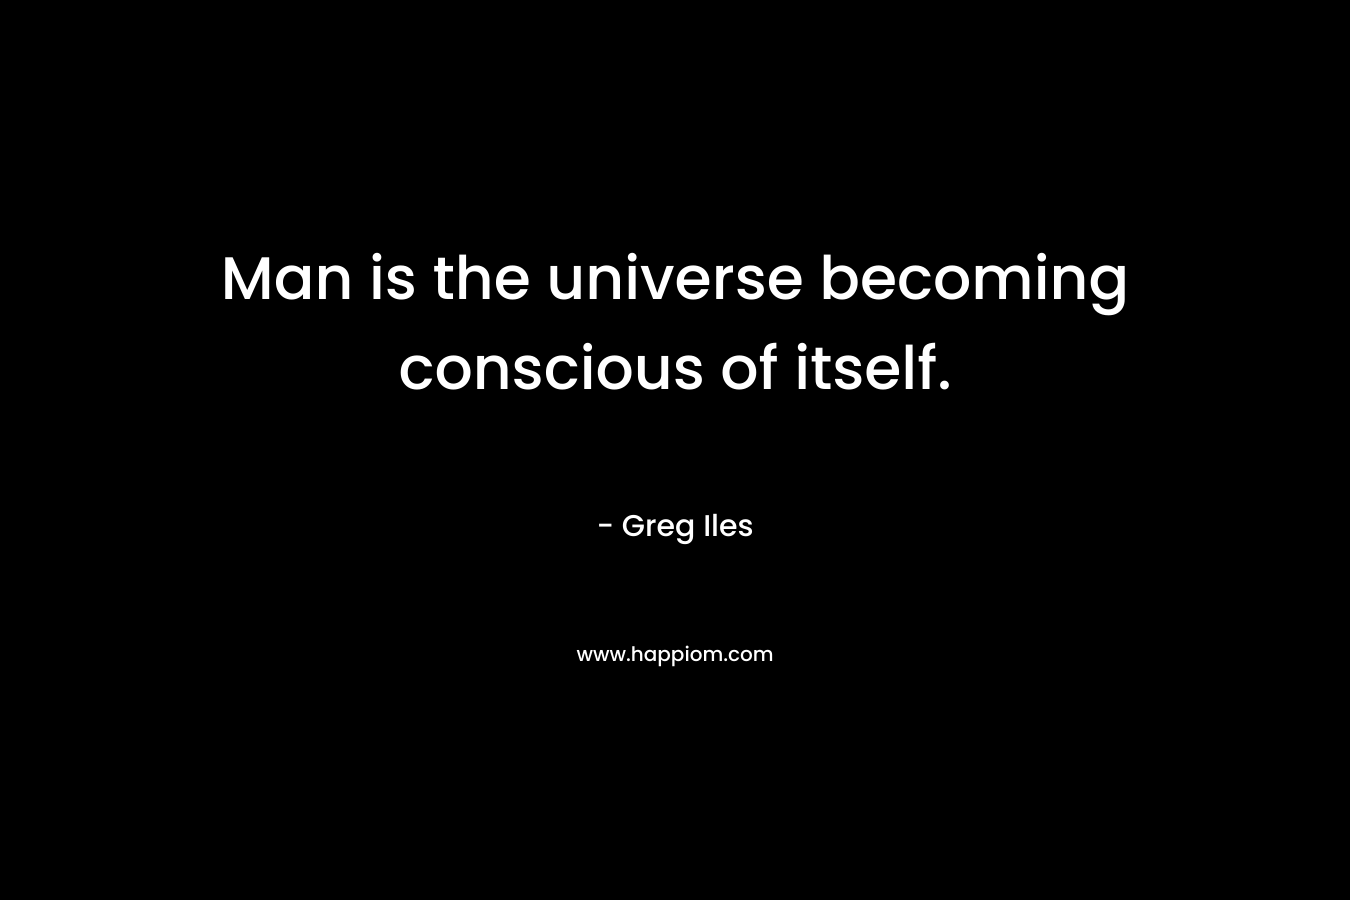 Man is the universe becoming conscious of itself.